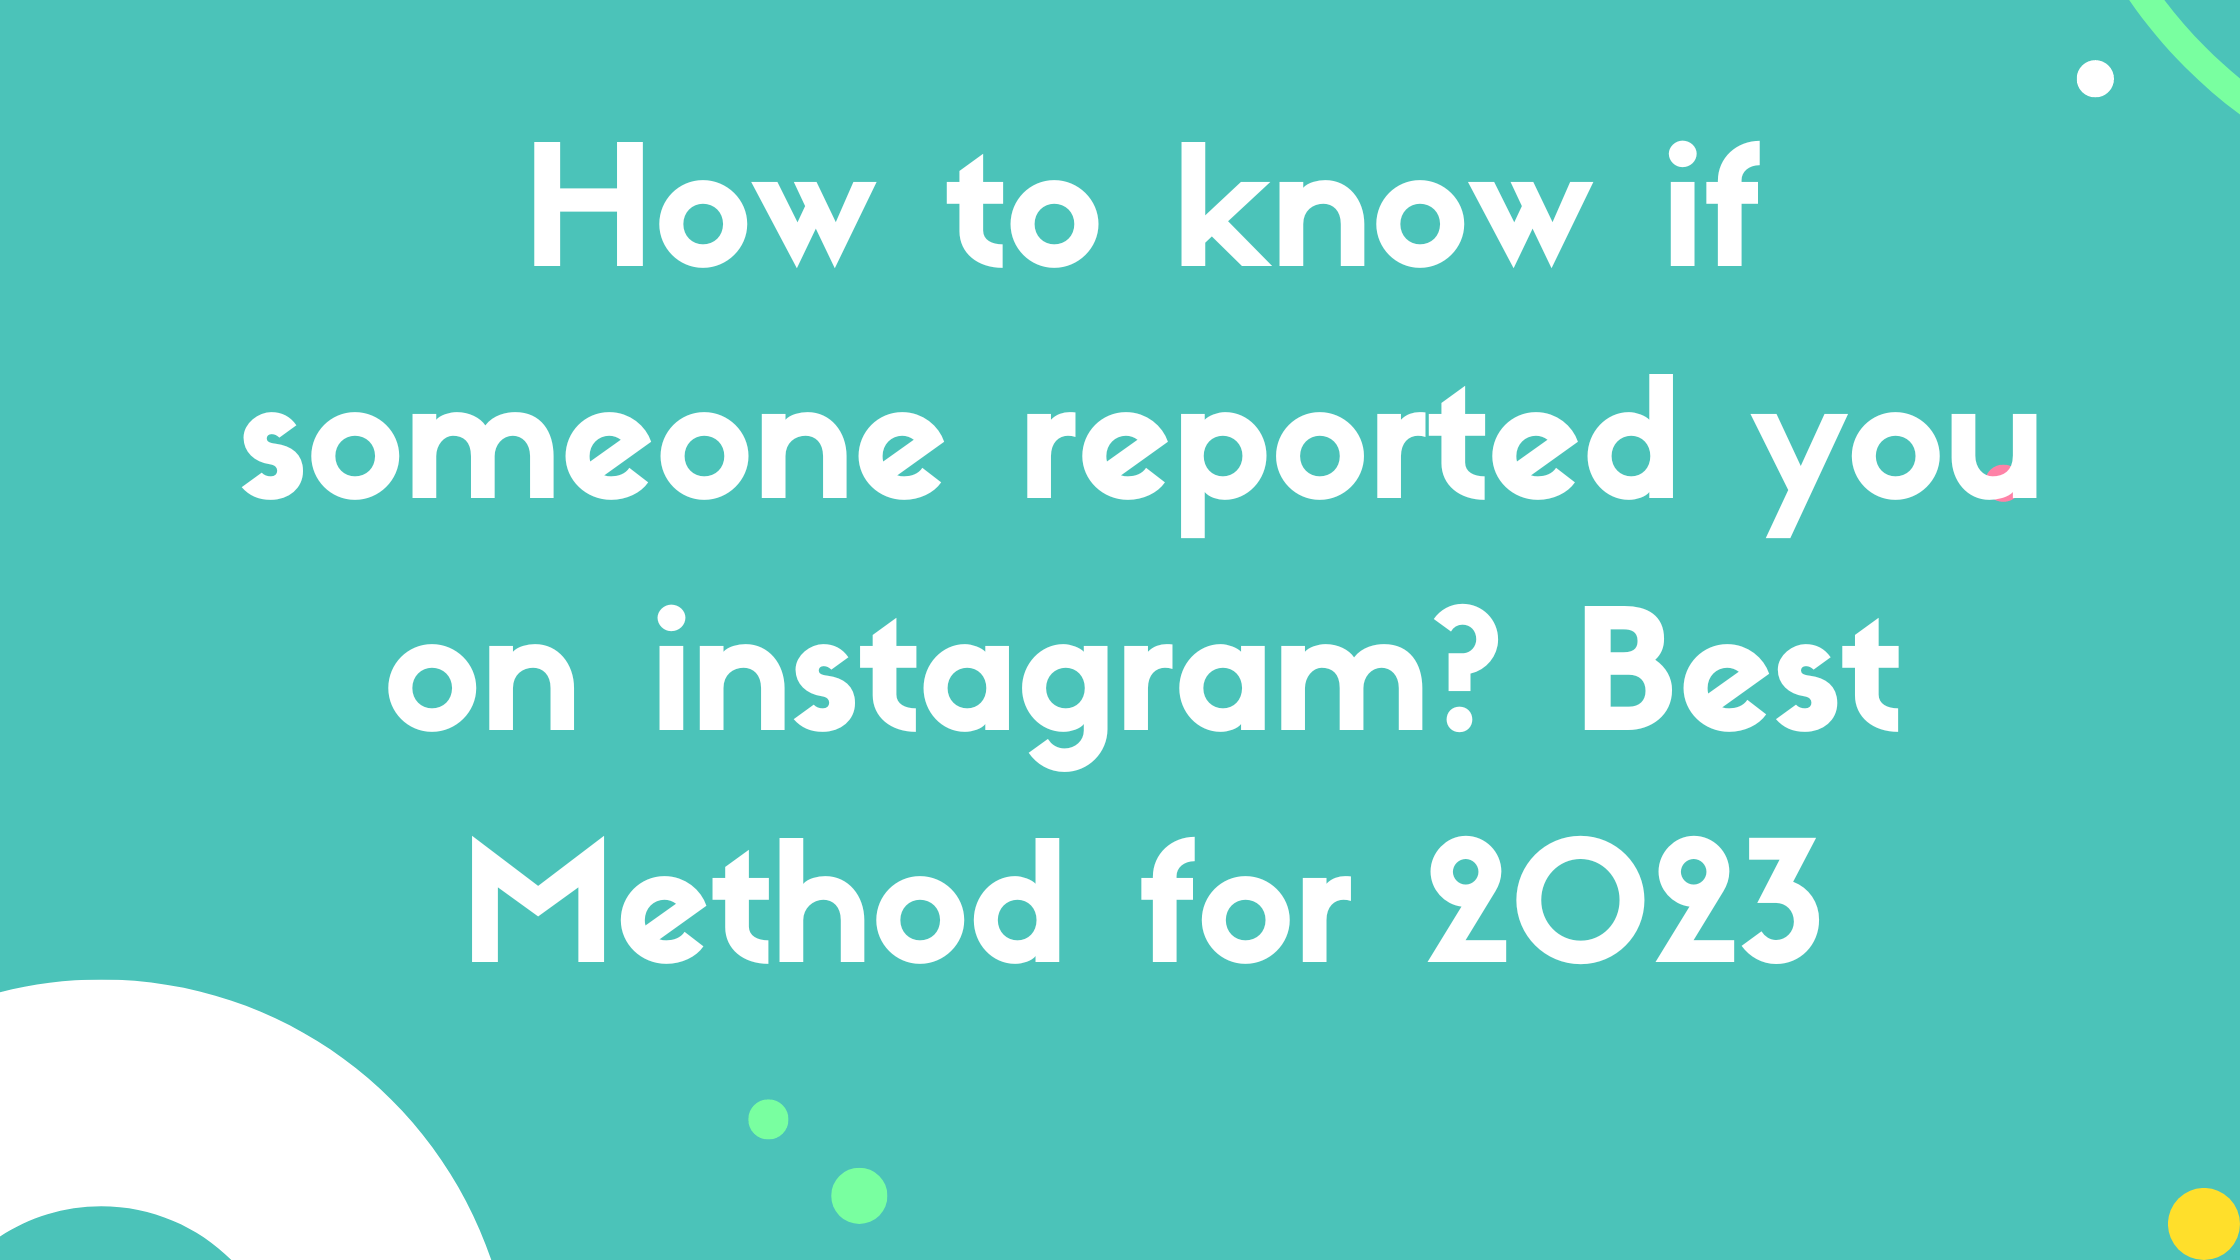 How to know if someone reported you on instagram?